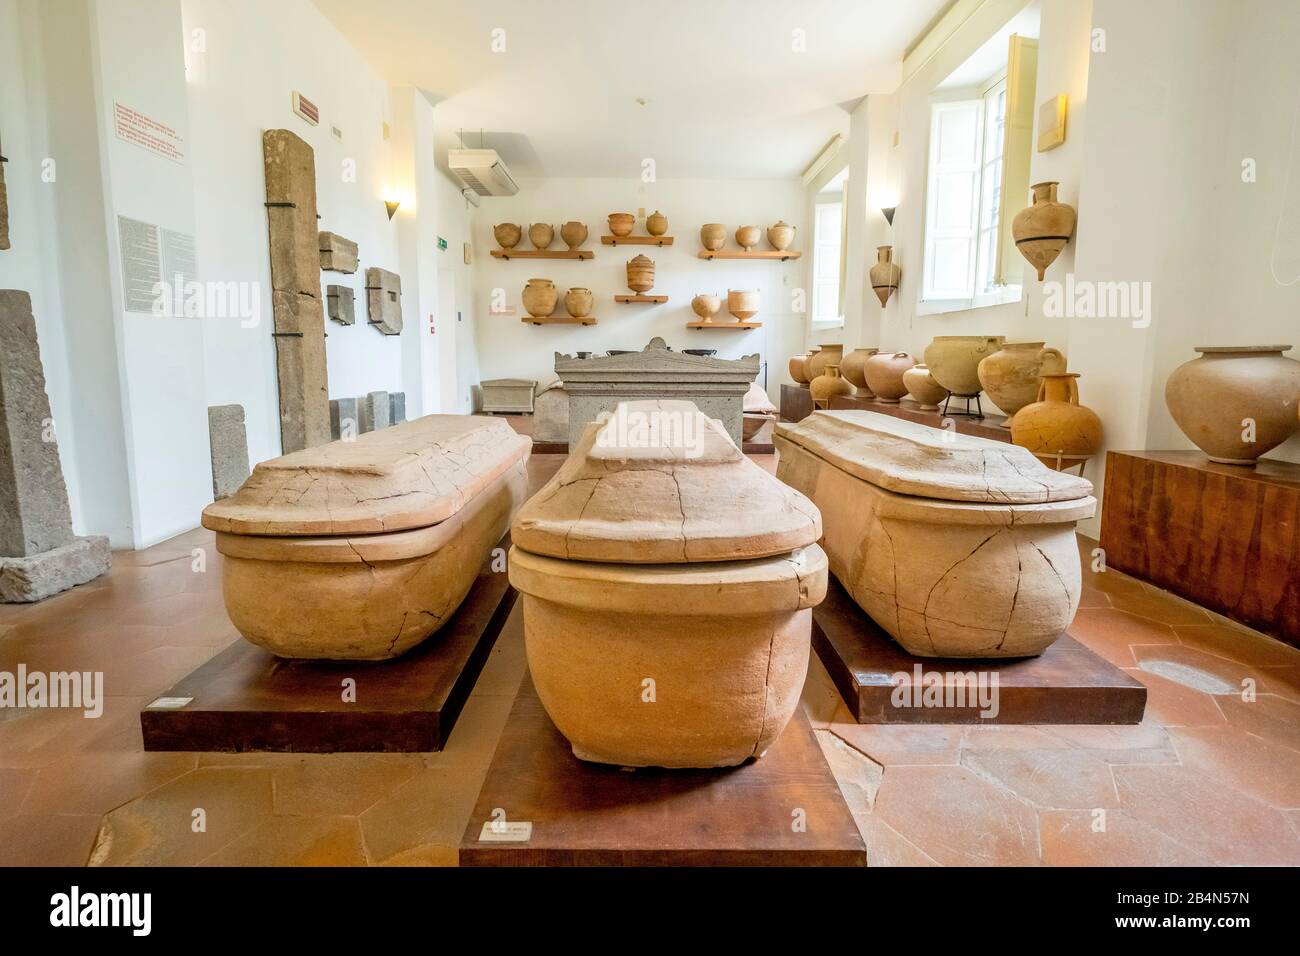 Clay coffins, historical clay coffin, Museo archeologico regional eoliano, Archaeological Museum of the Aeolian Islands, founder Luigi Bernabò Brea, Lipari, Aeolian Islands, Aeolian Islands, Tyrrhenian Sea, Southern Italy, Europe, Sicily, Italy Stock Photo